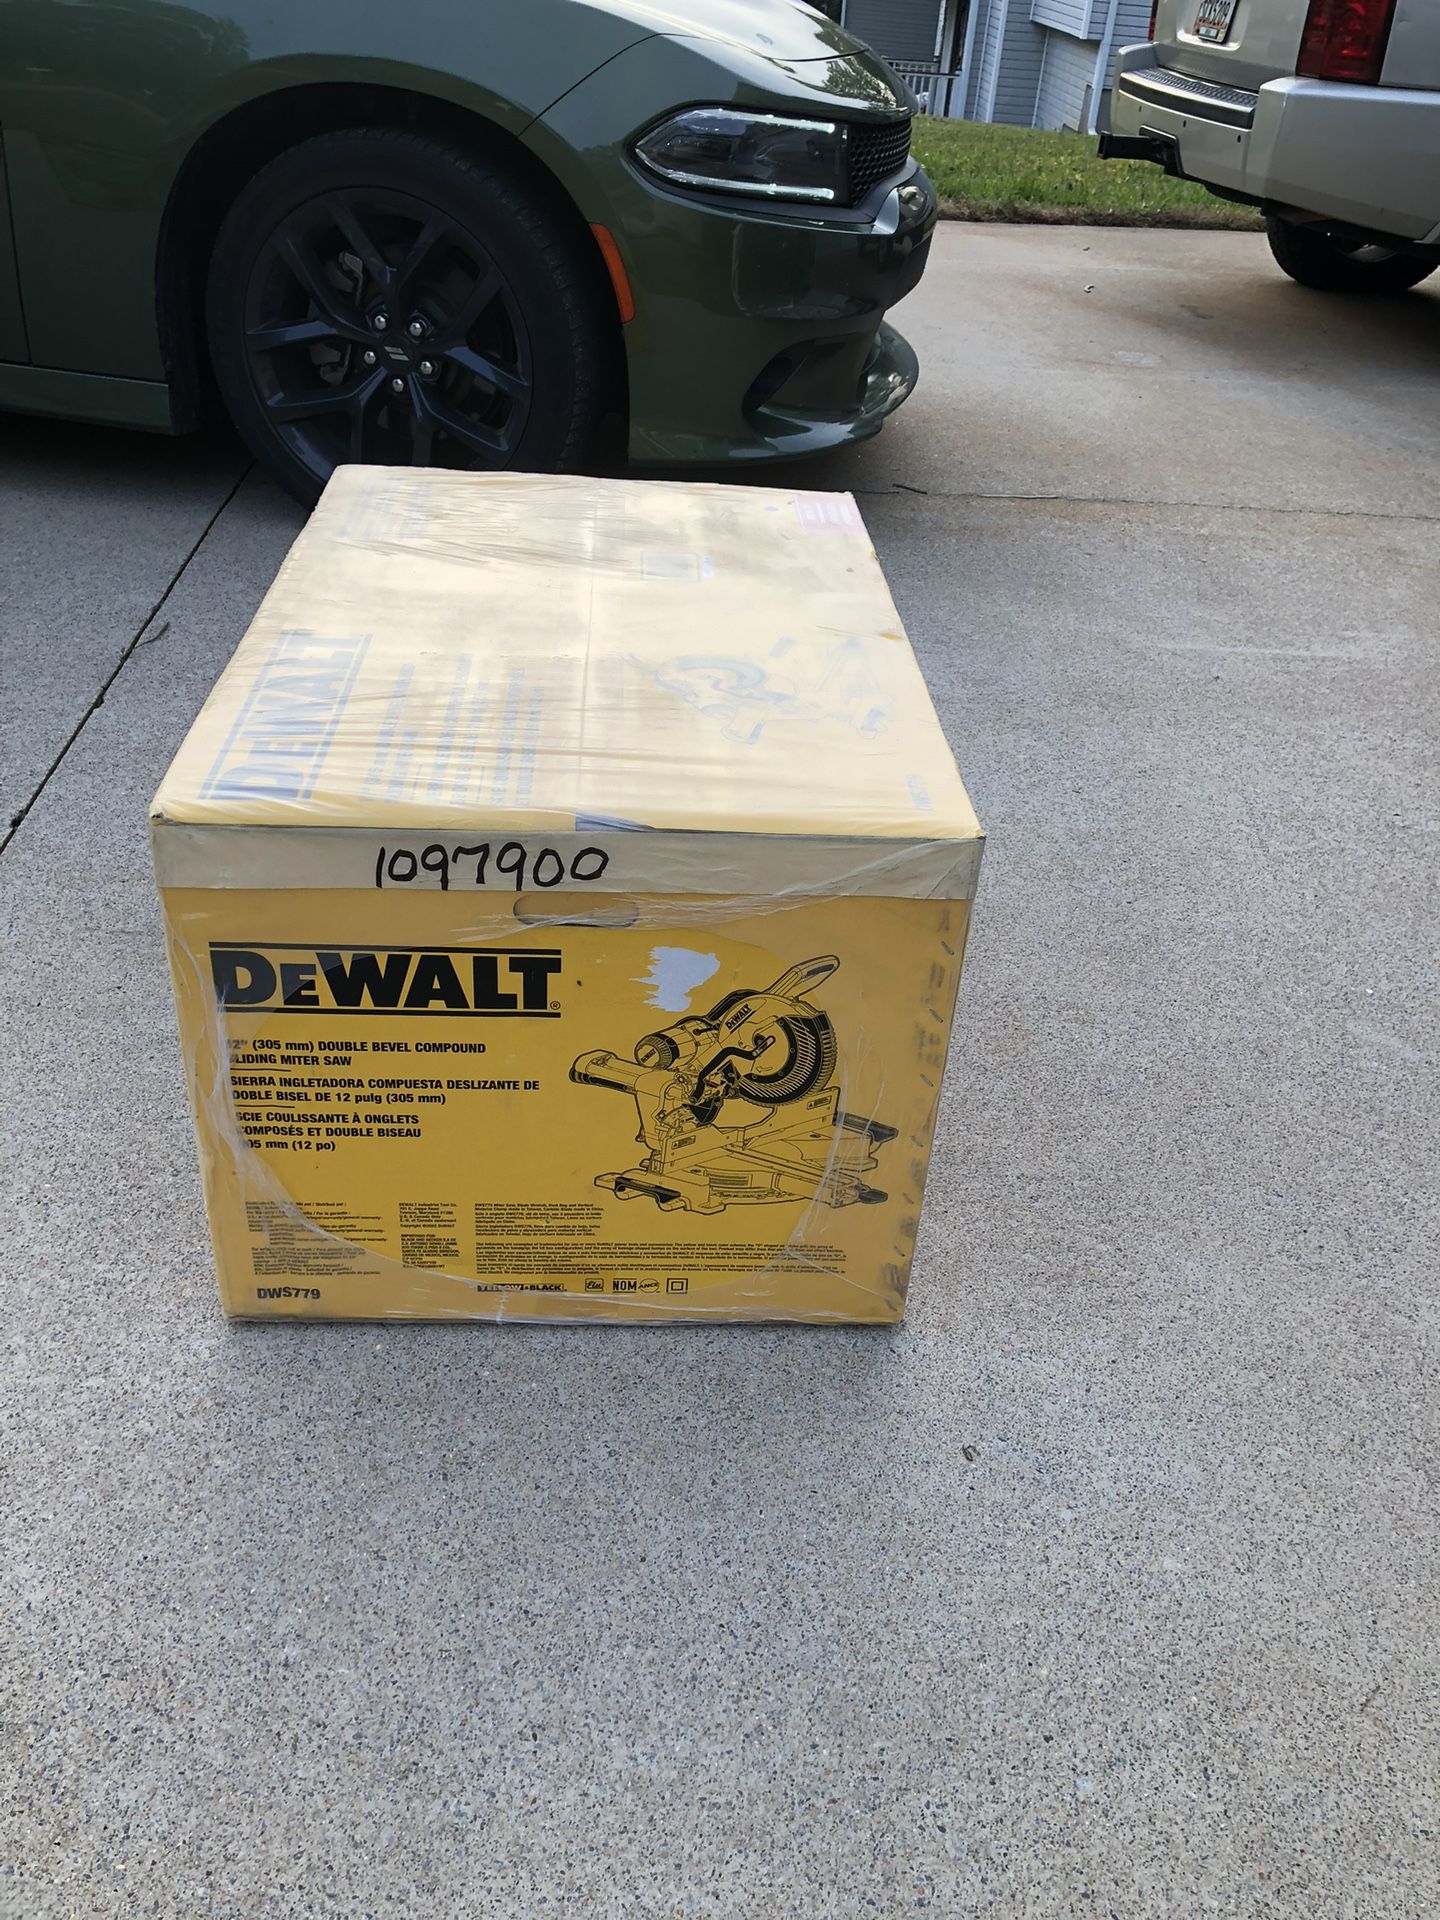 BRAND NEW 12" (305 mmm)DOUBLE BEVEL COMPOUND SLIDING PATER SAW